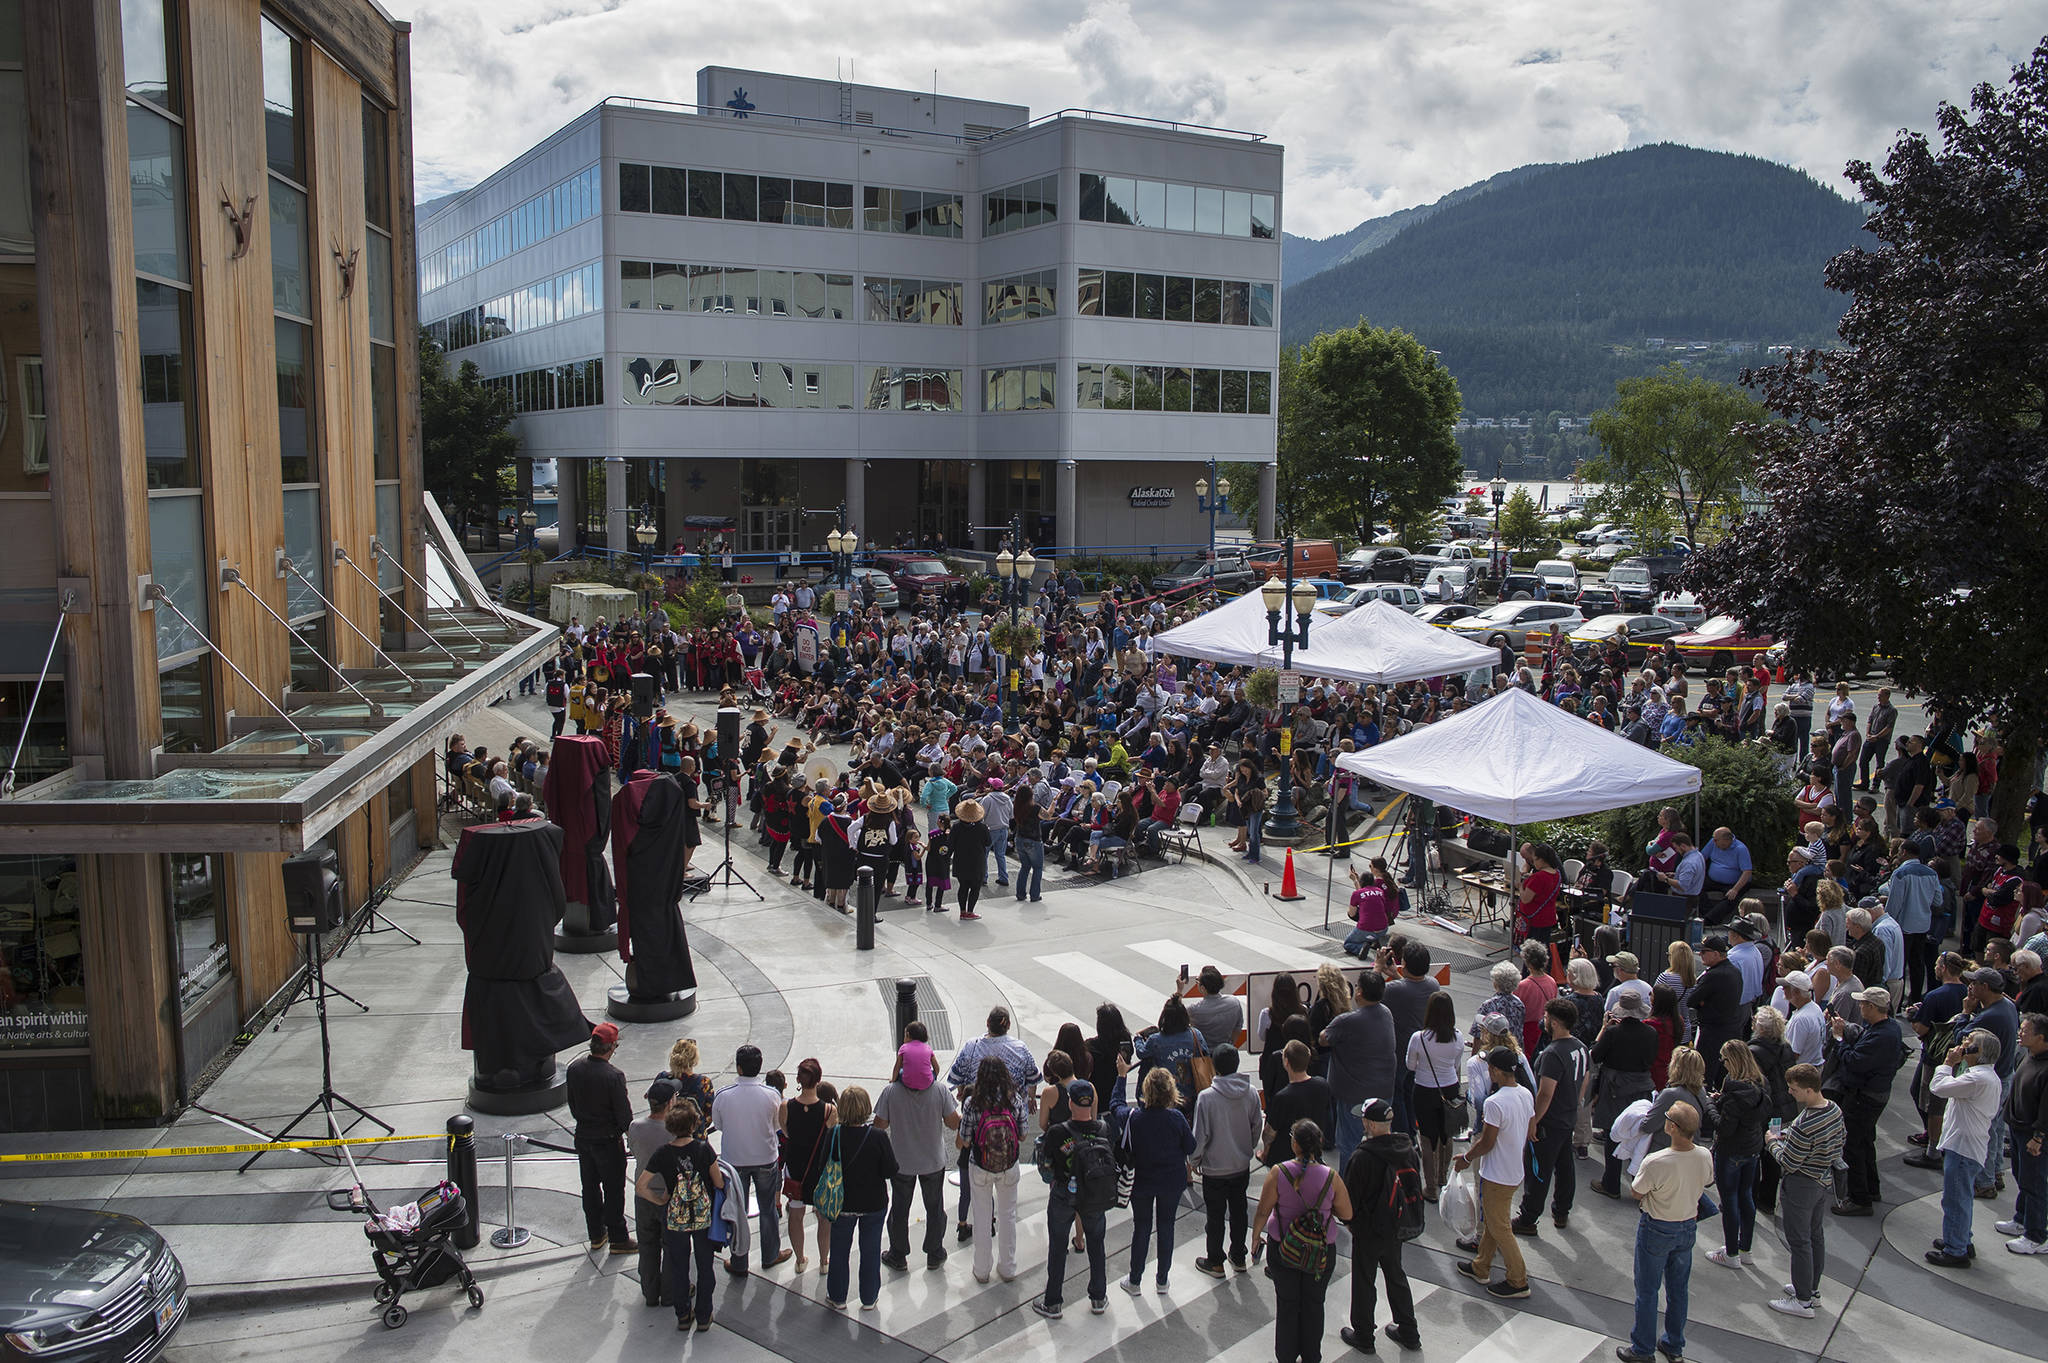 Three bronze house posts dedicated during a ceremony in front of the Walter Soboleff Center by Sealaska Heritage Institute on Sunday, Aug. 26, 2018. (Michael Penn | Juneau Empire)